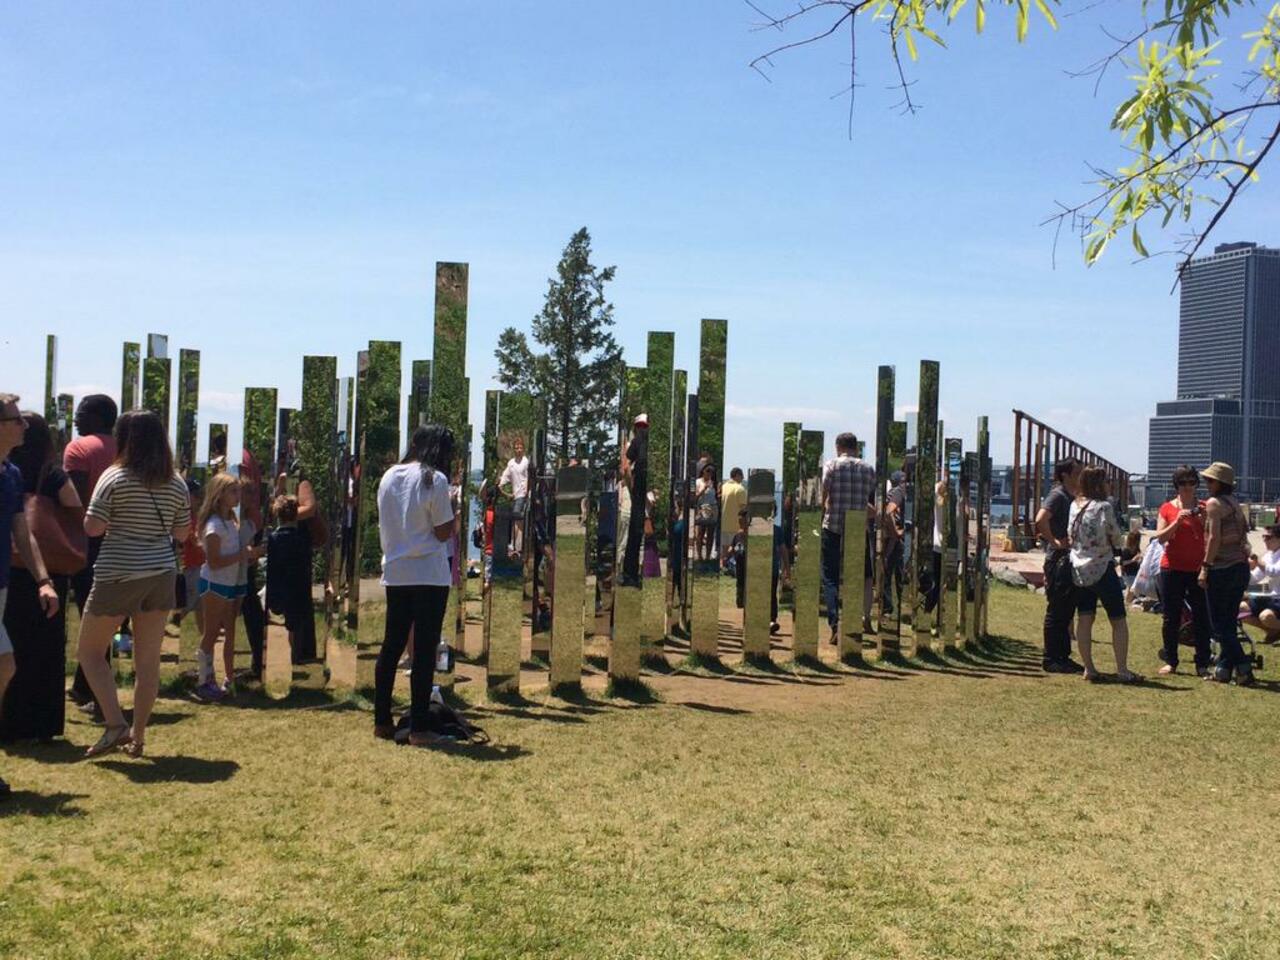 Spotted this #art installation by Jeppe Hein in @BklynBrdgPark over the #weekend! #pleasetouchtheart #sundayfunday http://t.co/nd3tOusjOr